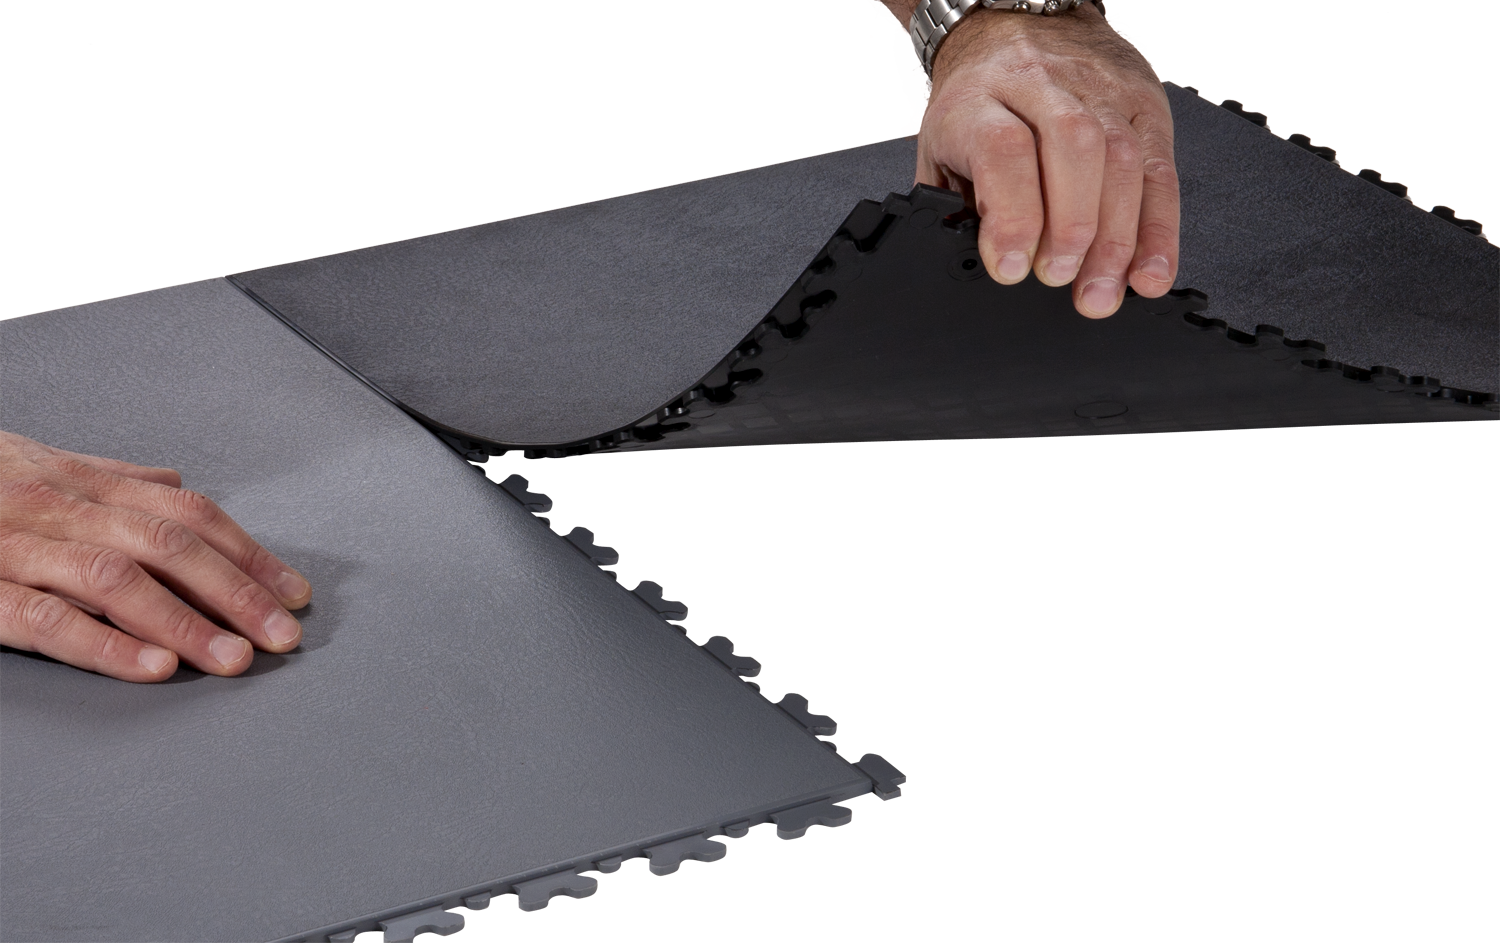 A person is holding onto the edge of a mat.